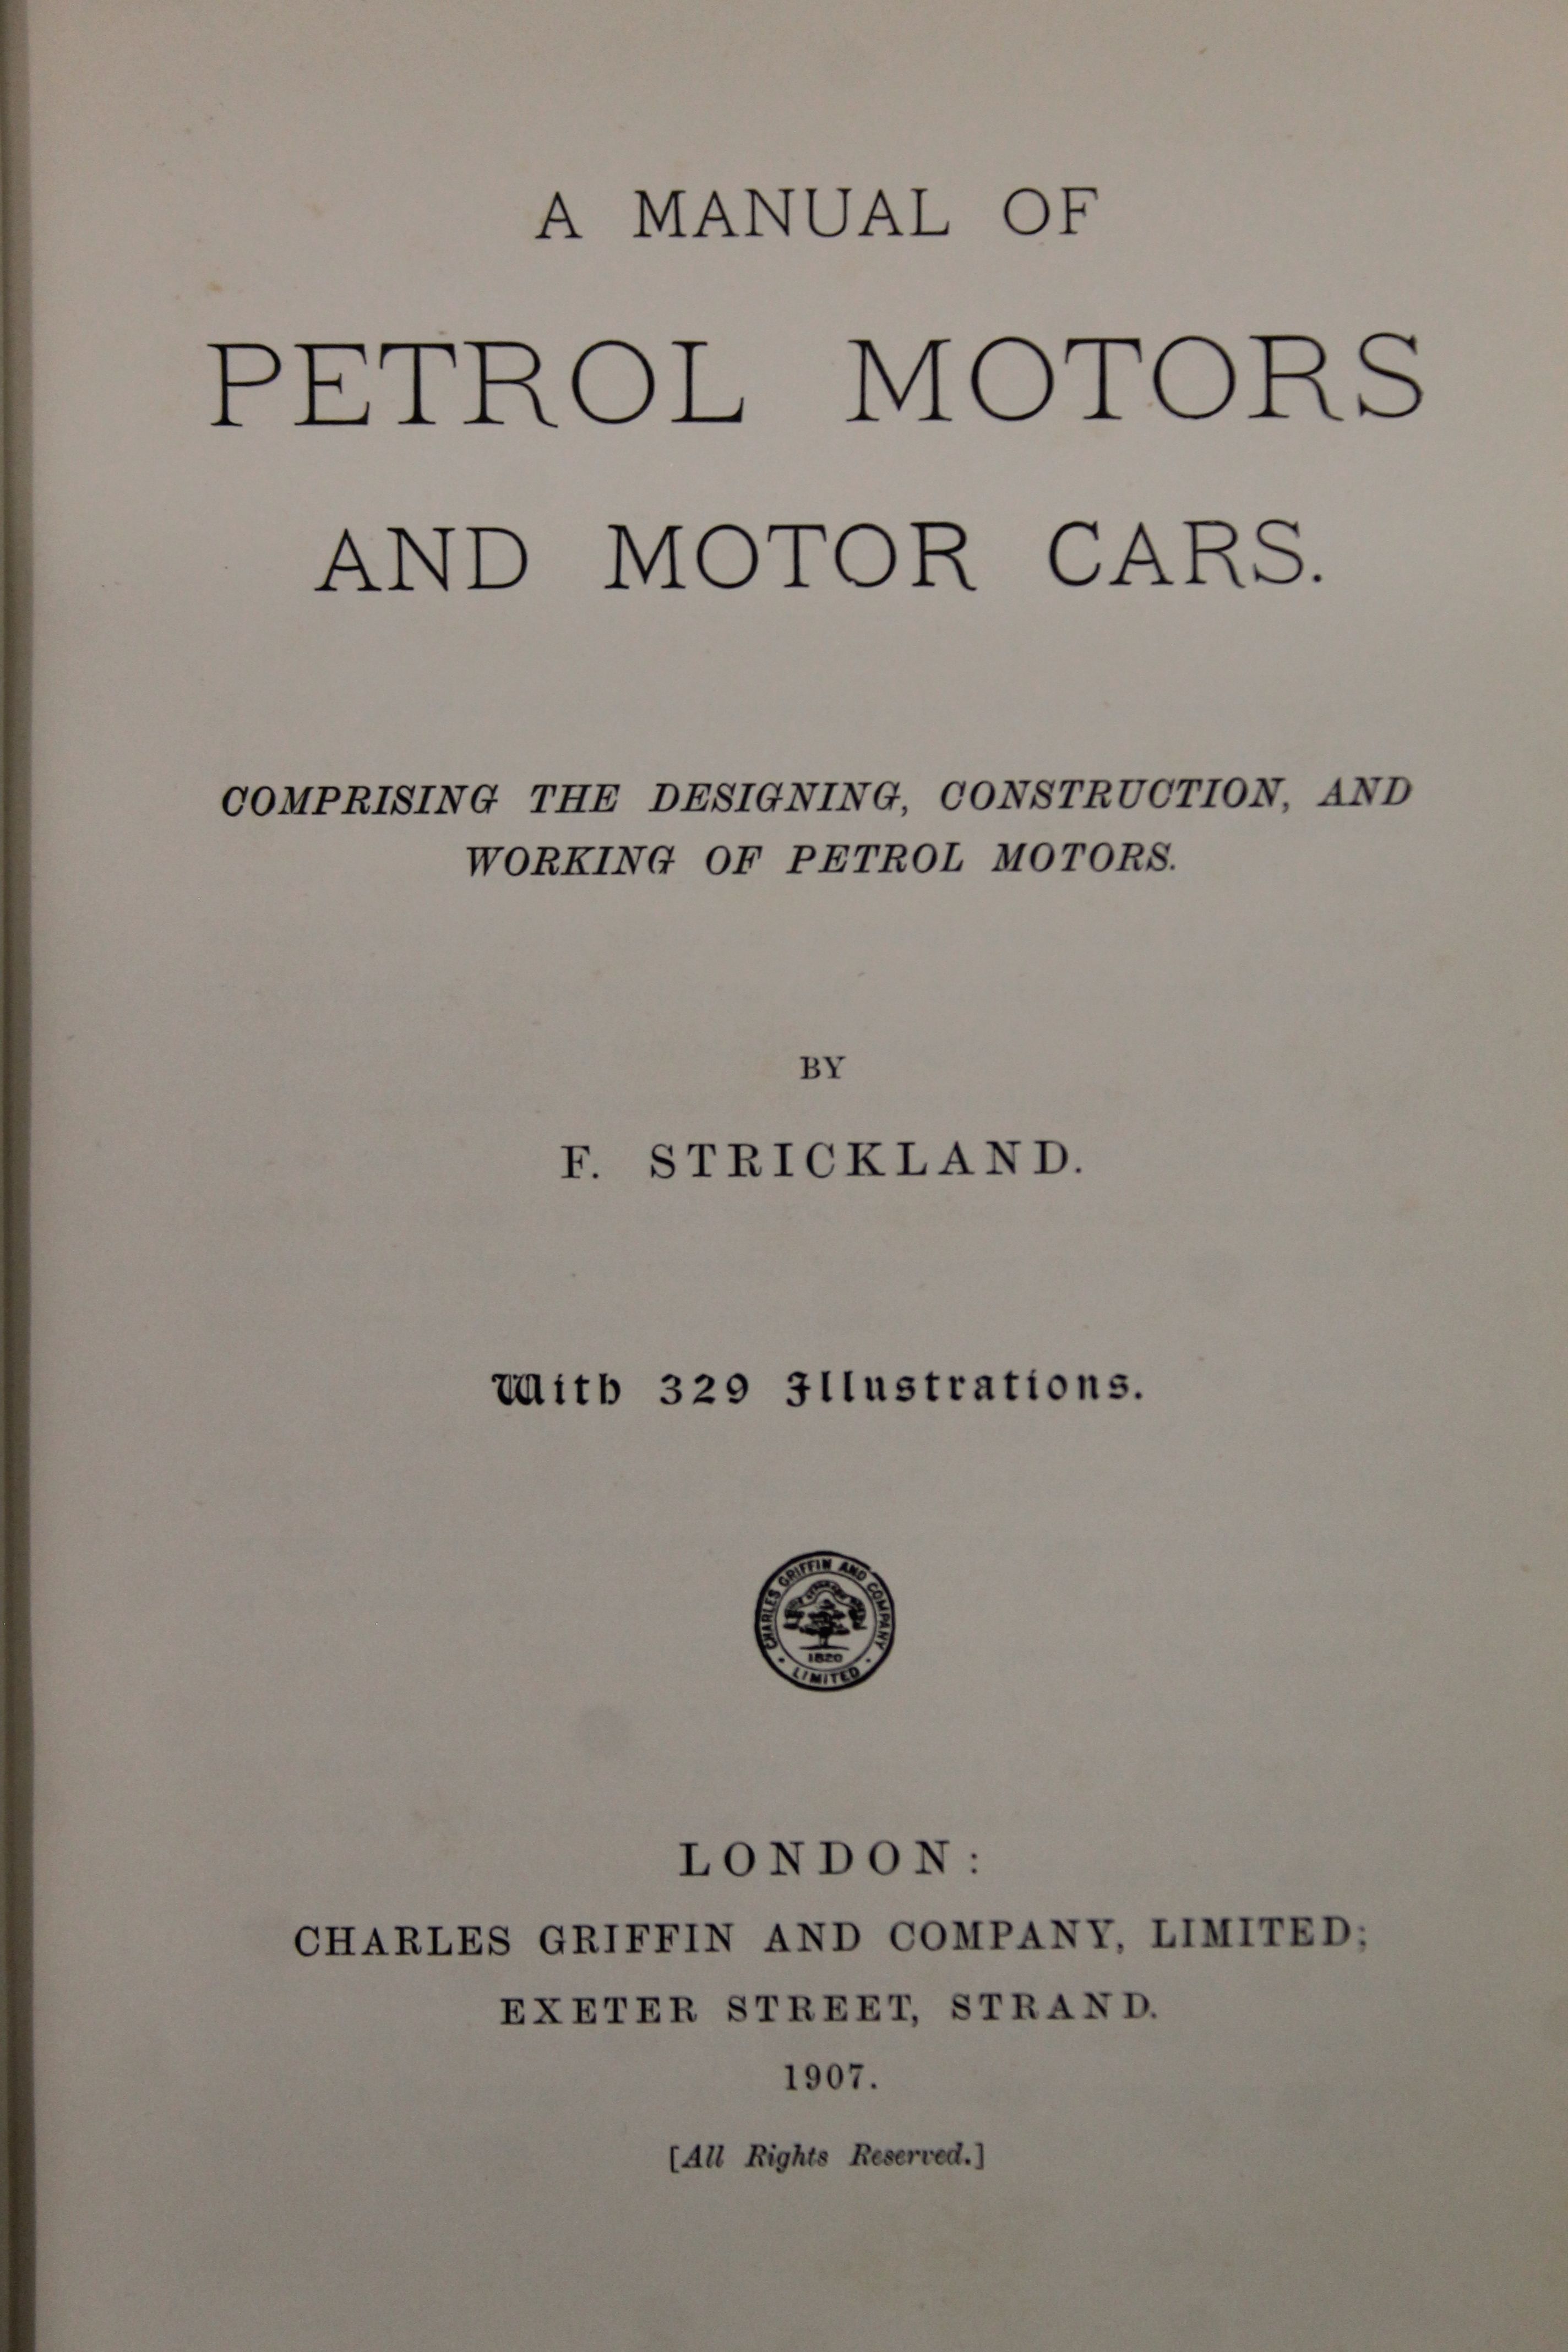 Thompson (Sir Henry), The Motor-Car Its Nature, Use and Management, Frederick Warne, - Image 29 of 56